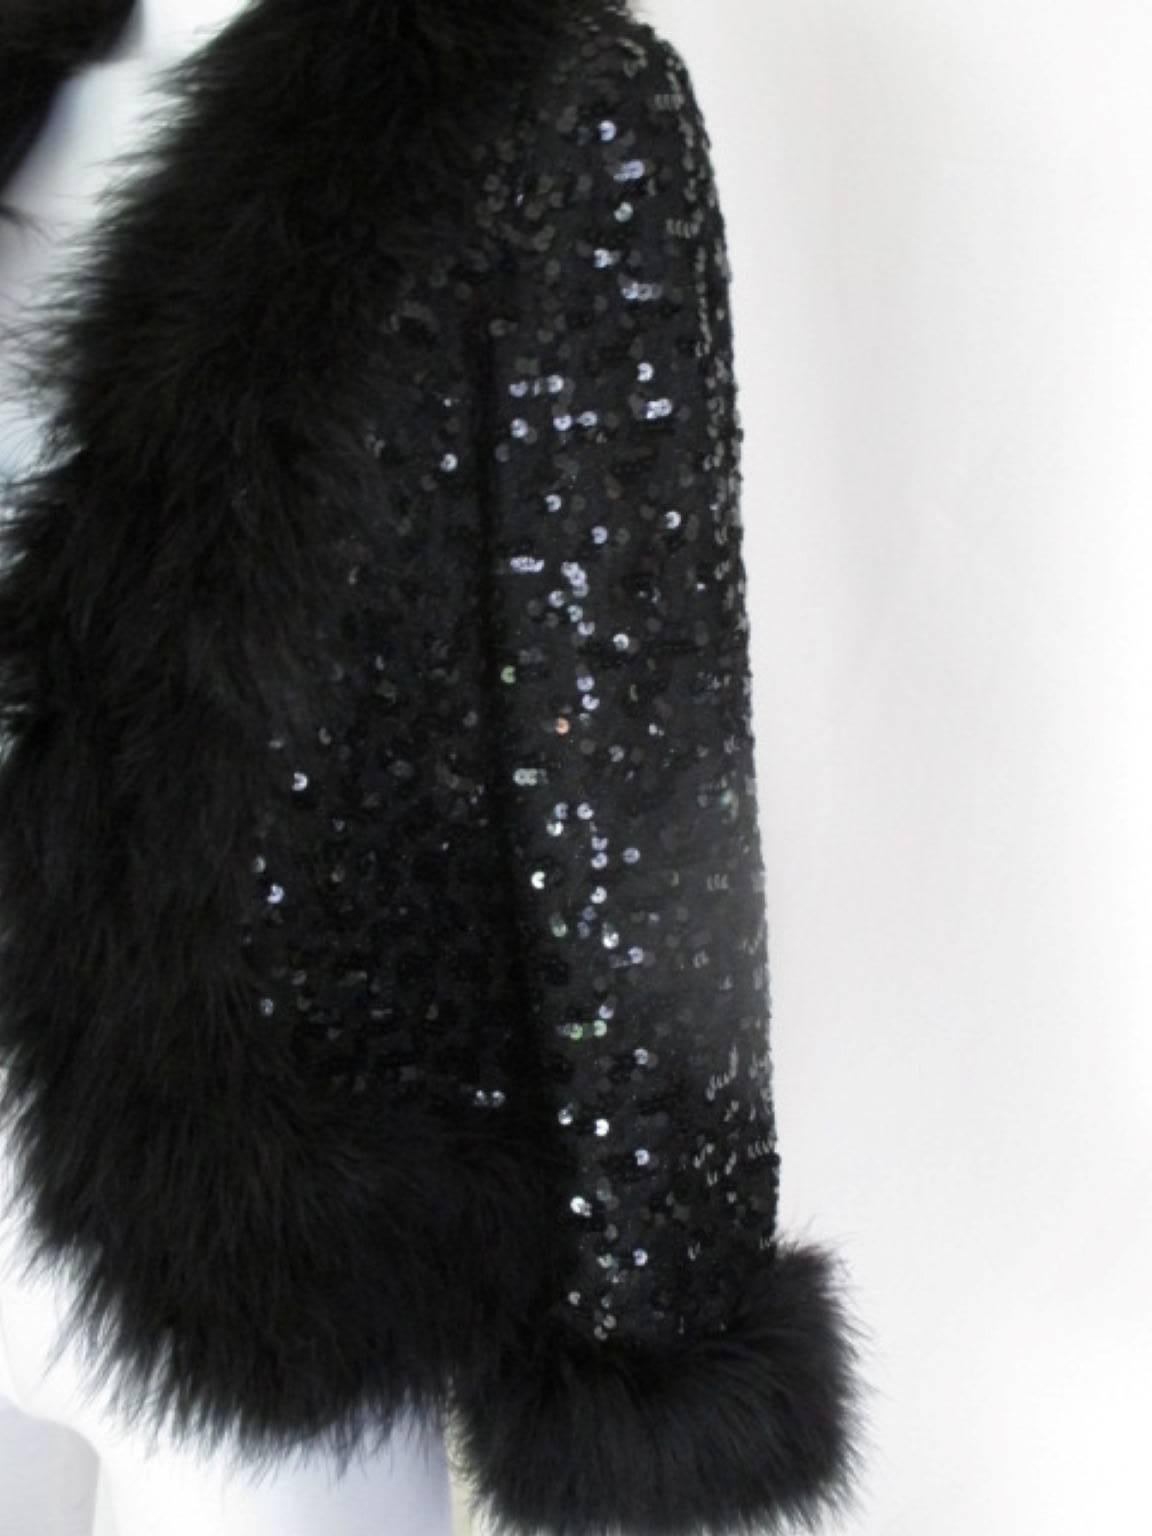 This vintage sequin jacket is trimmed with black marabou.
From; Lillian Diamond California
Size is about medium, see section measurements.

Please note that vintage items are not new and therefore might have minor imperfections.